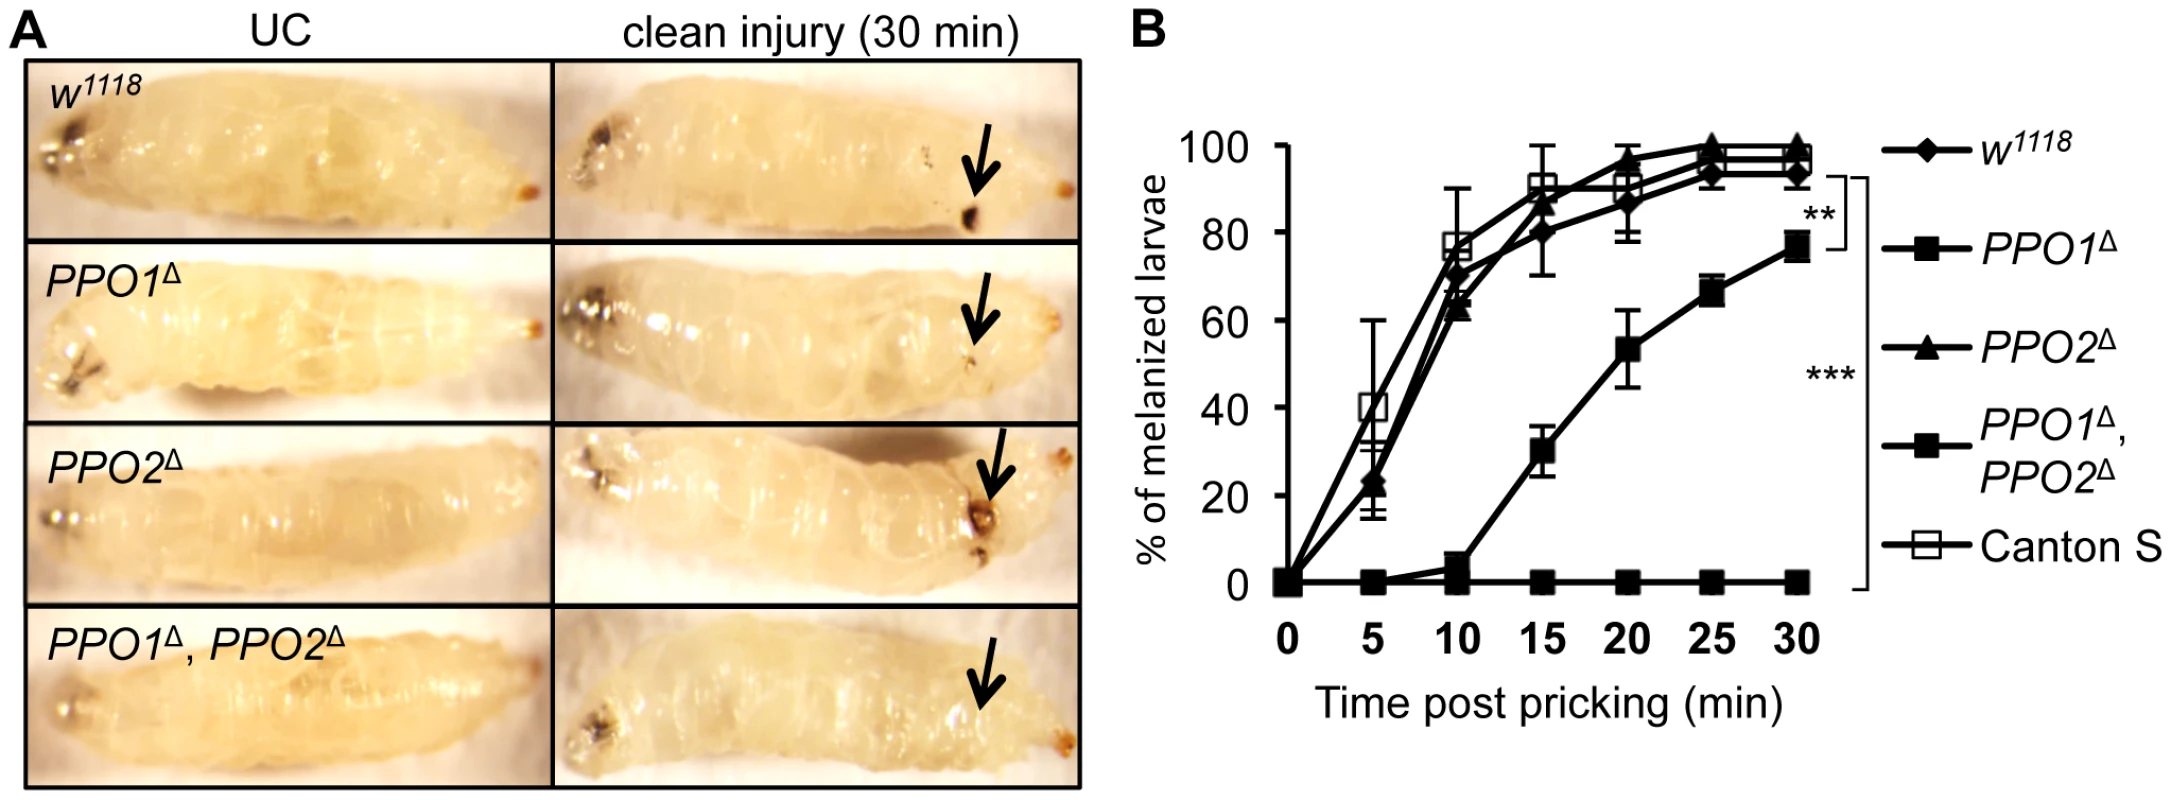 Both PPO1 and PPO2 contribute to injury related melanization in larvae.